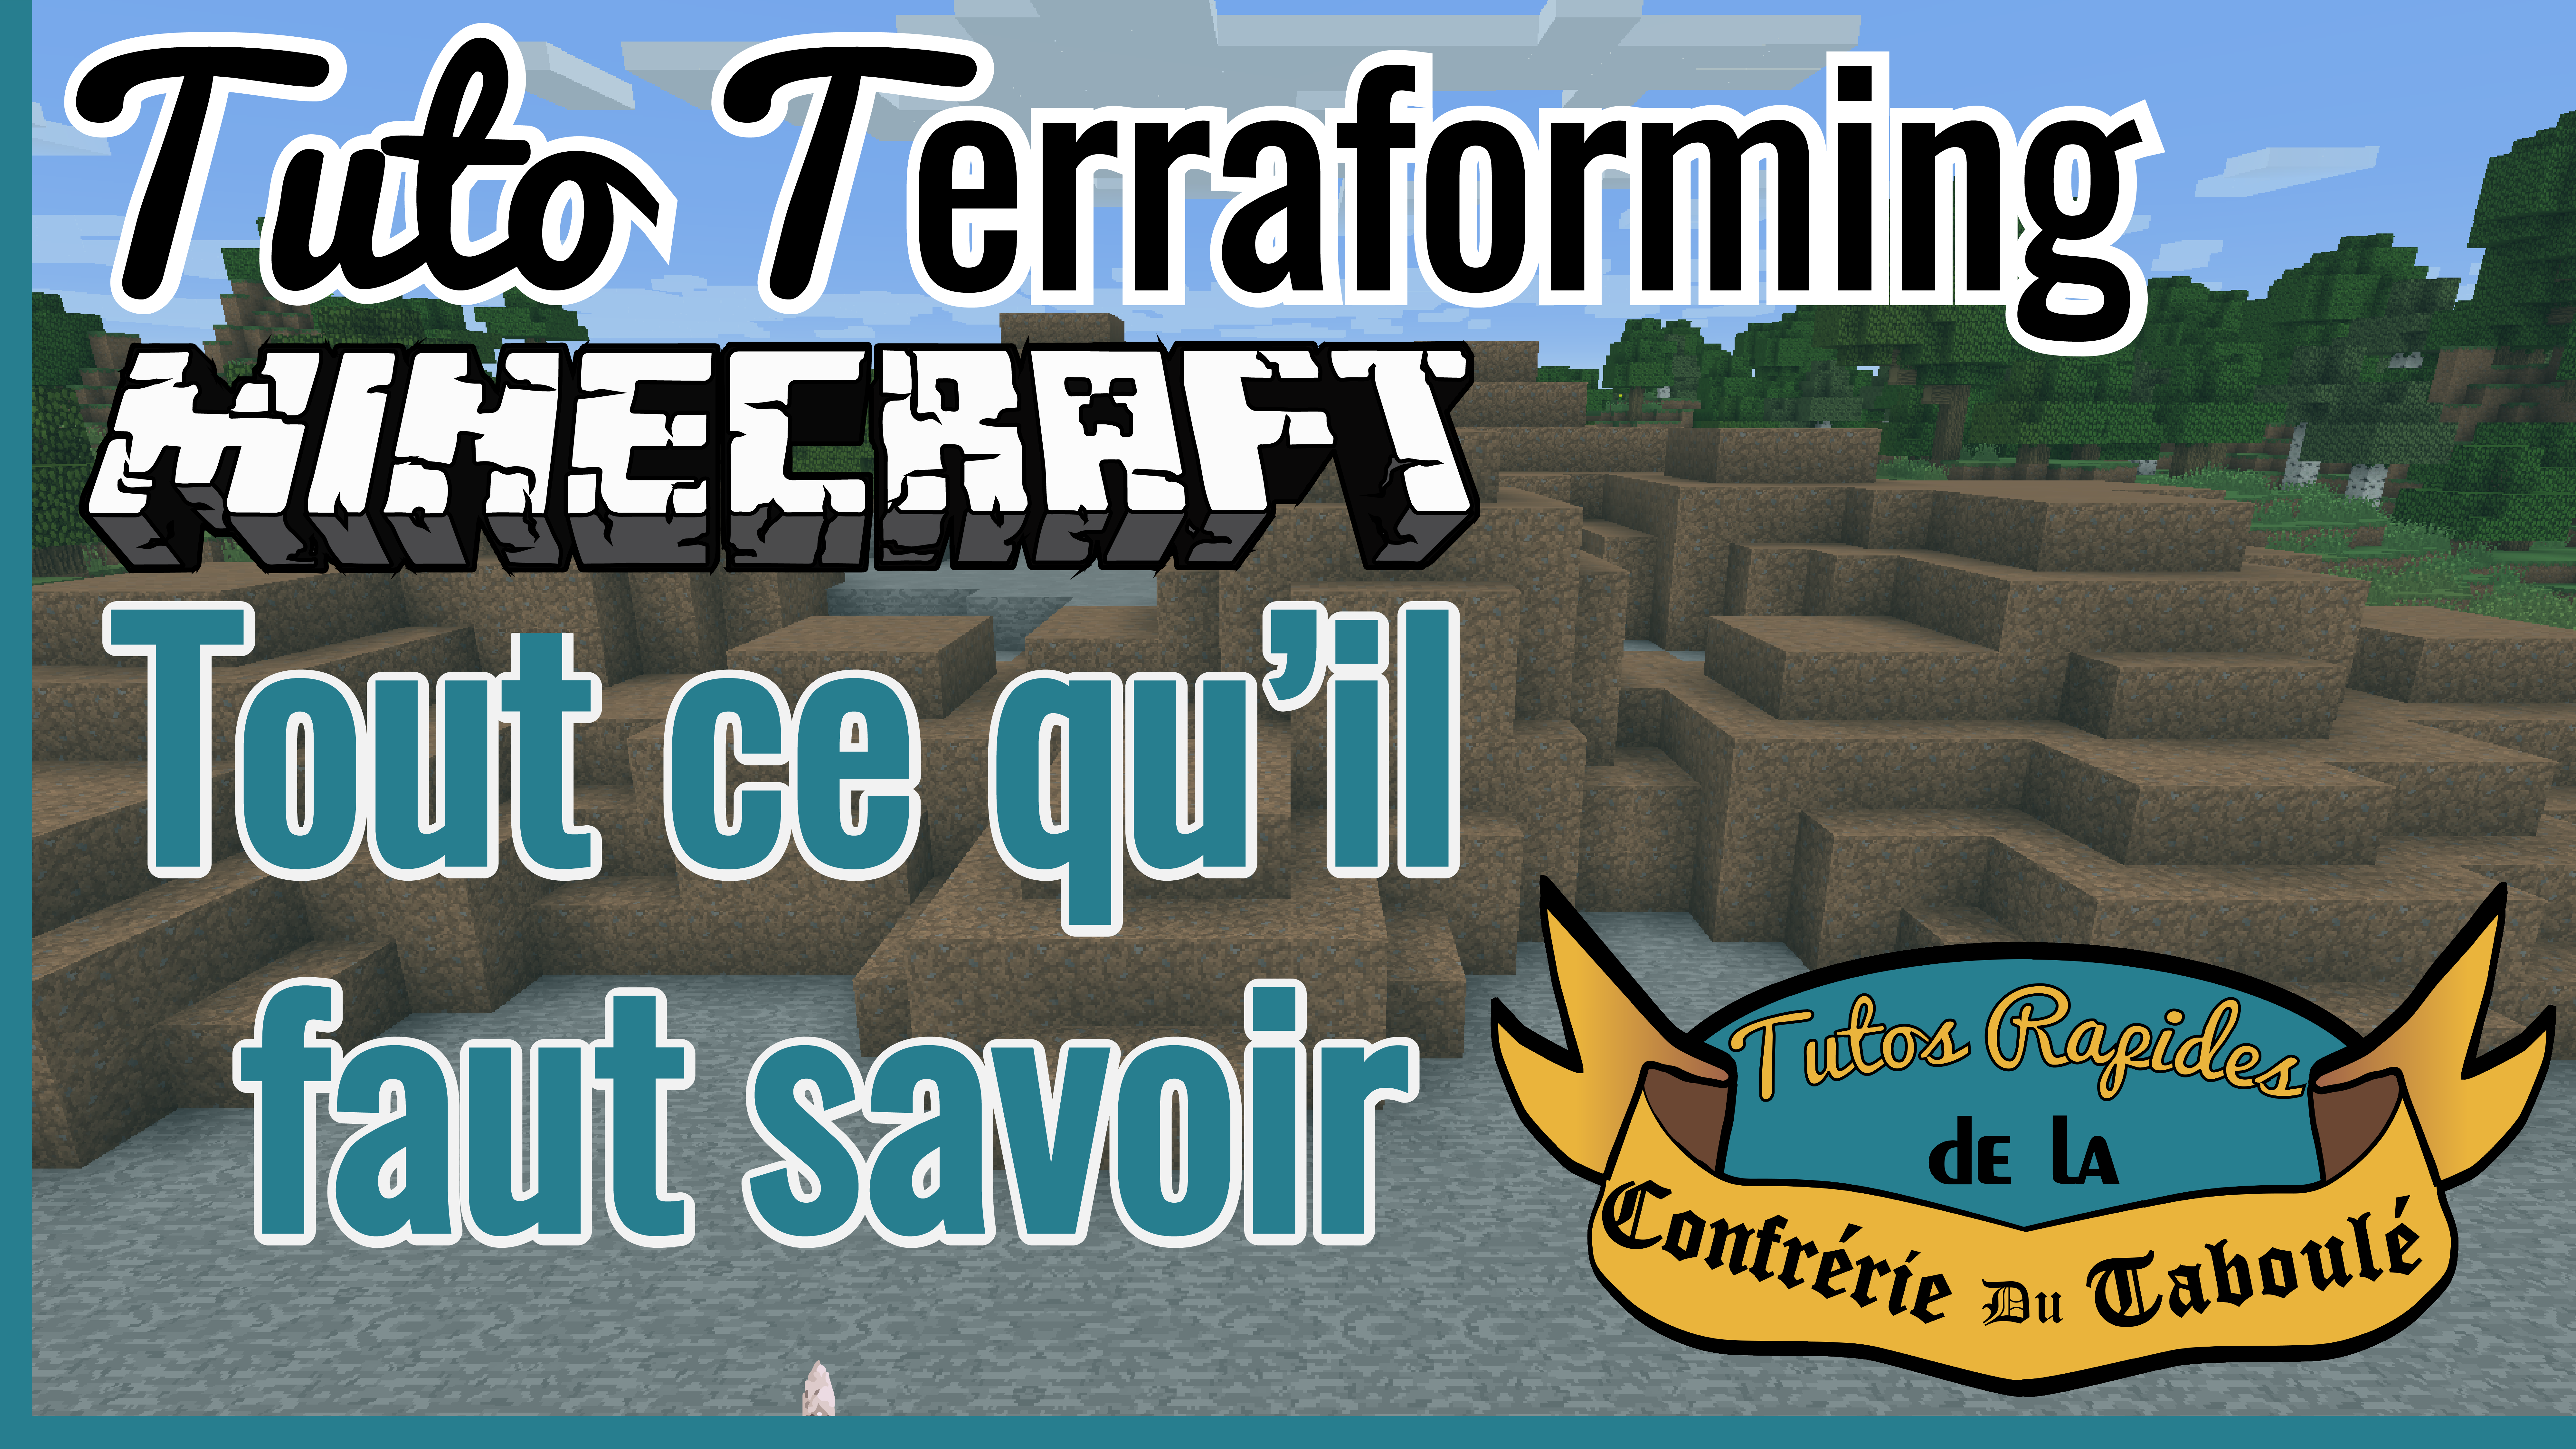 You are currently viewing Tutos Rapides Terraforming Minecraft : WorldEdit et VoxelSniper [complet]